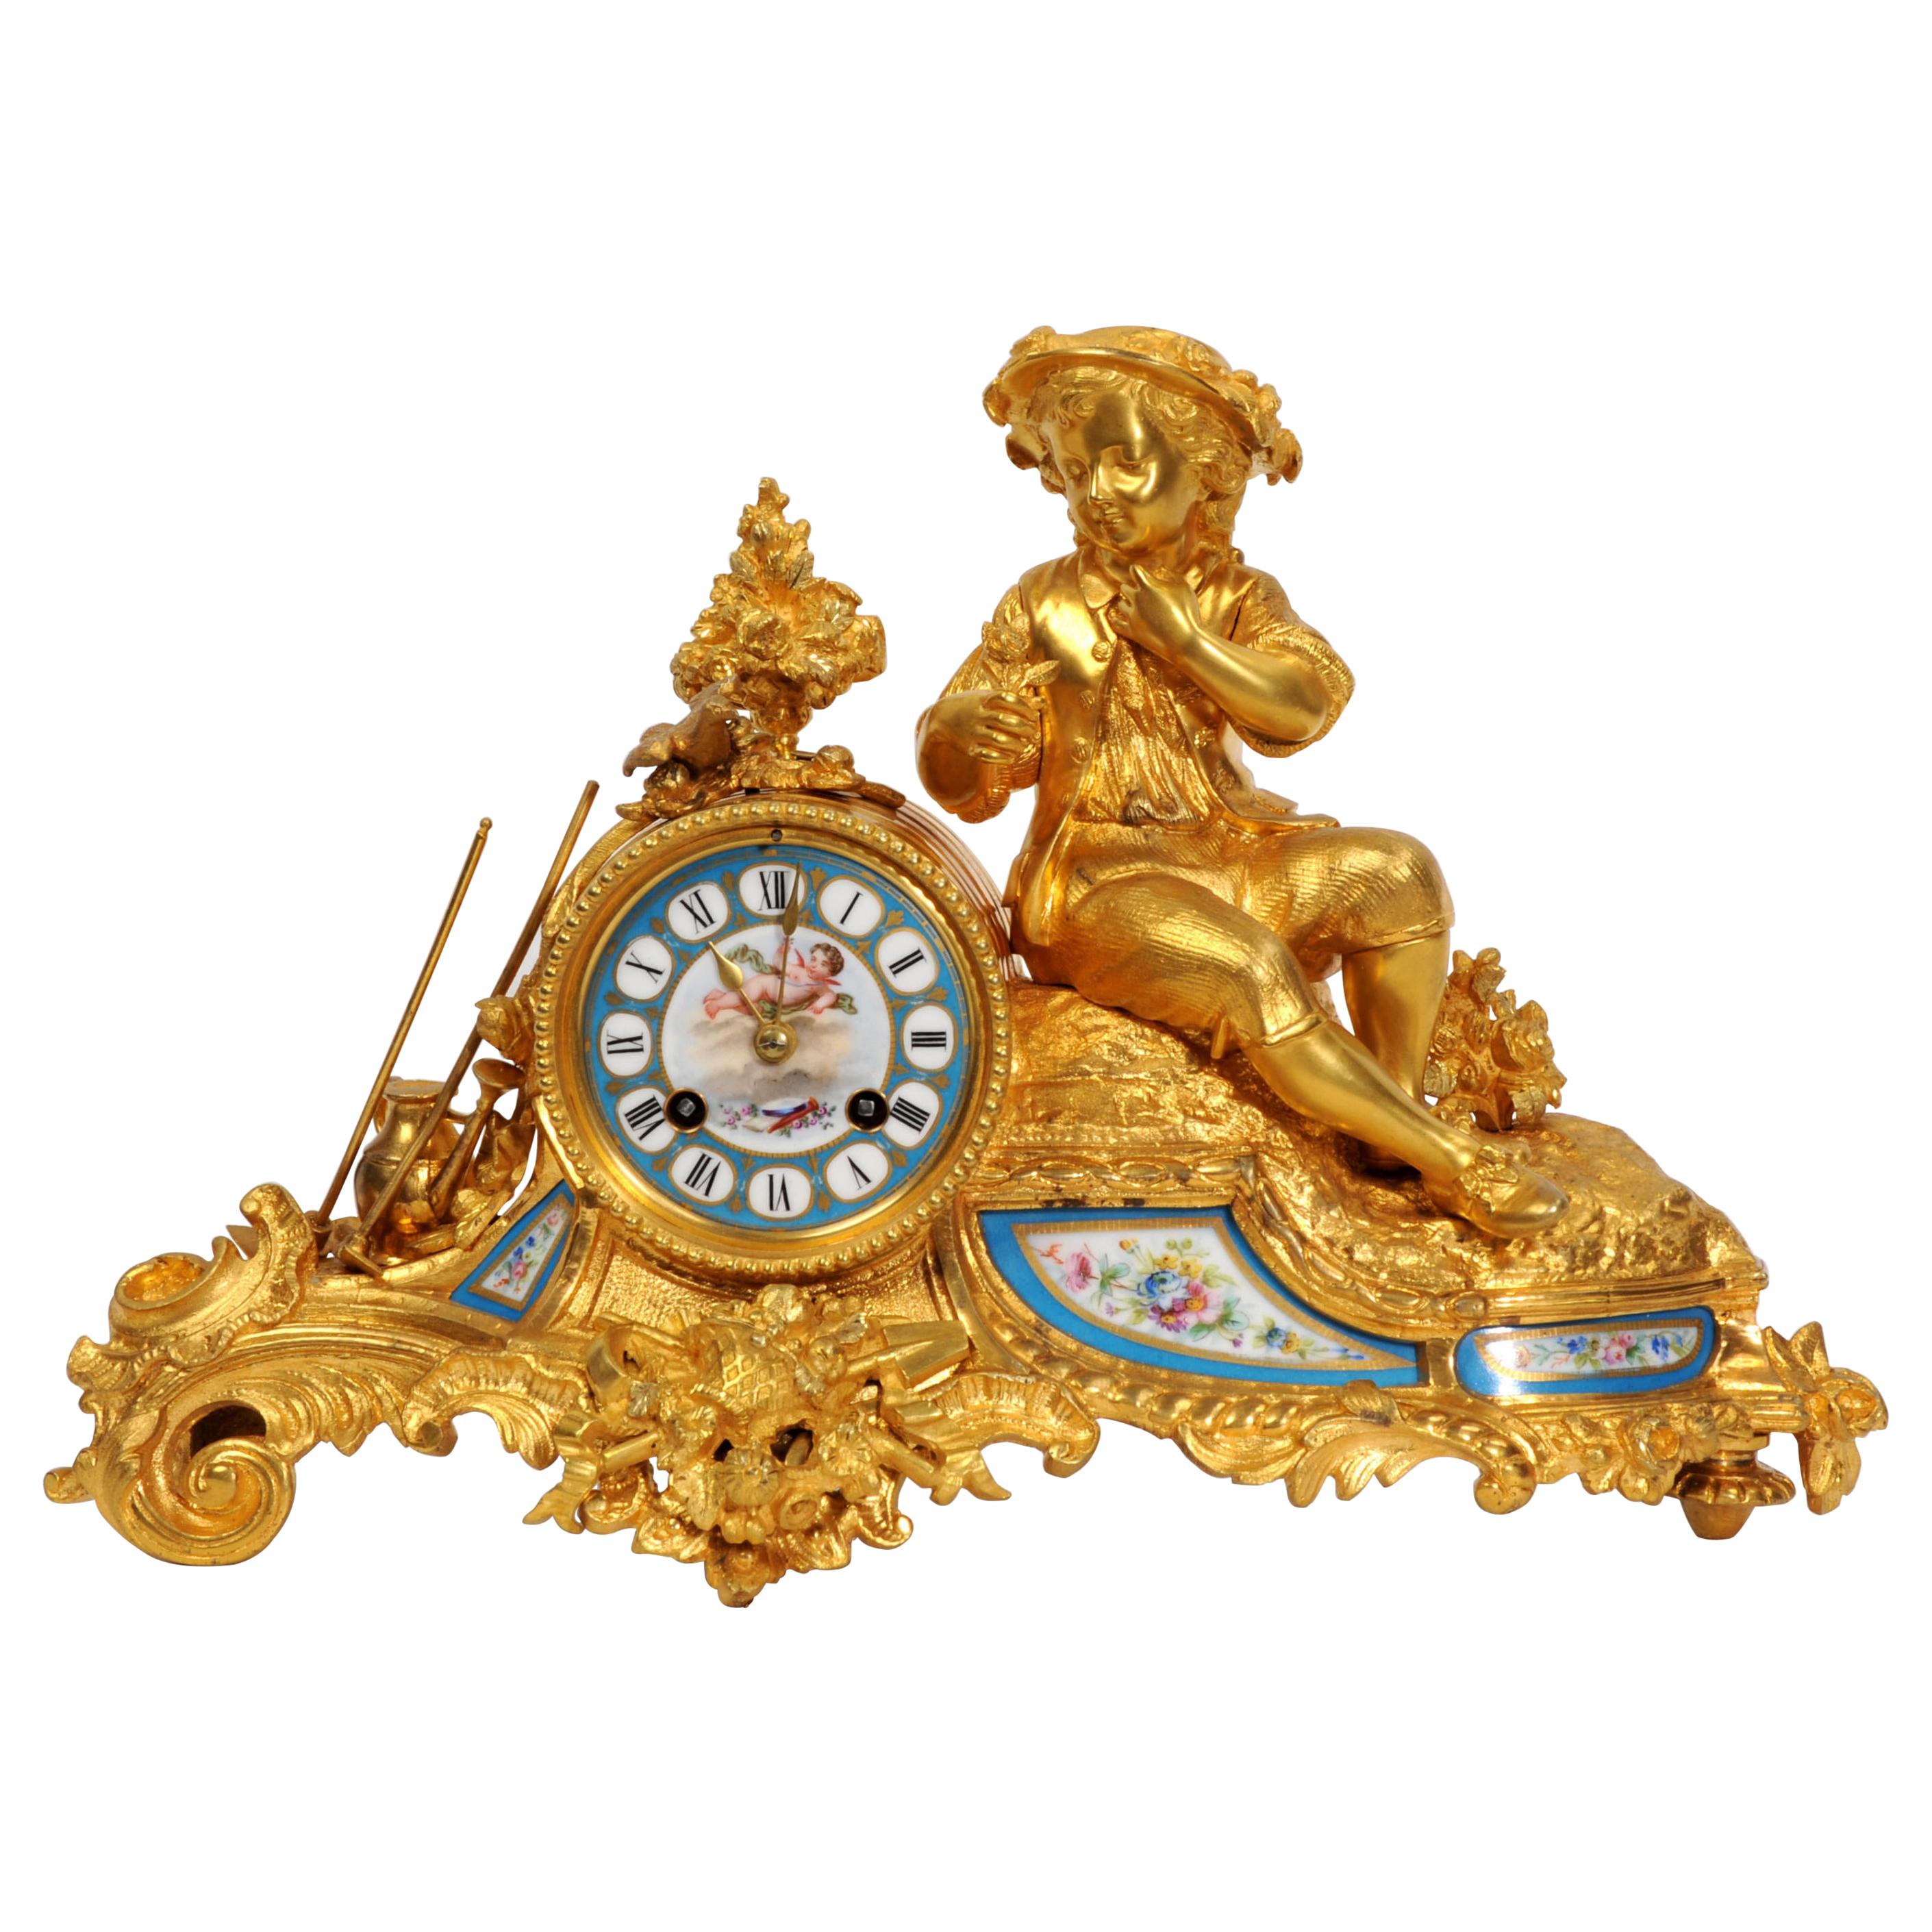 Japy Freres Ormolu and Sevres Porcelain Clock, the Gardener, Antique French 1860